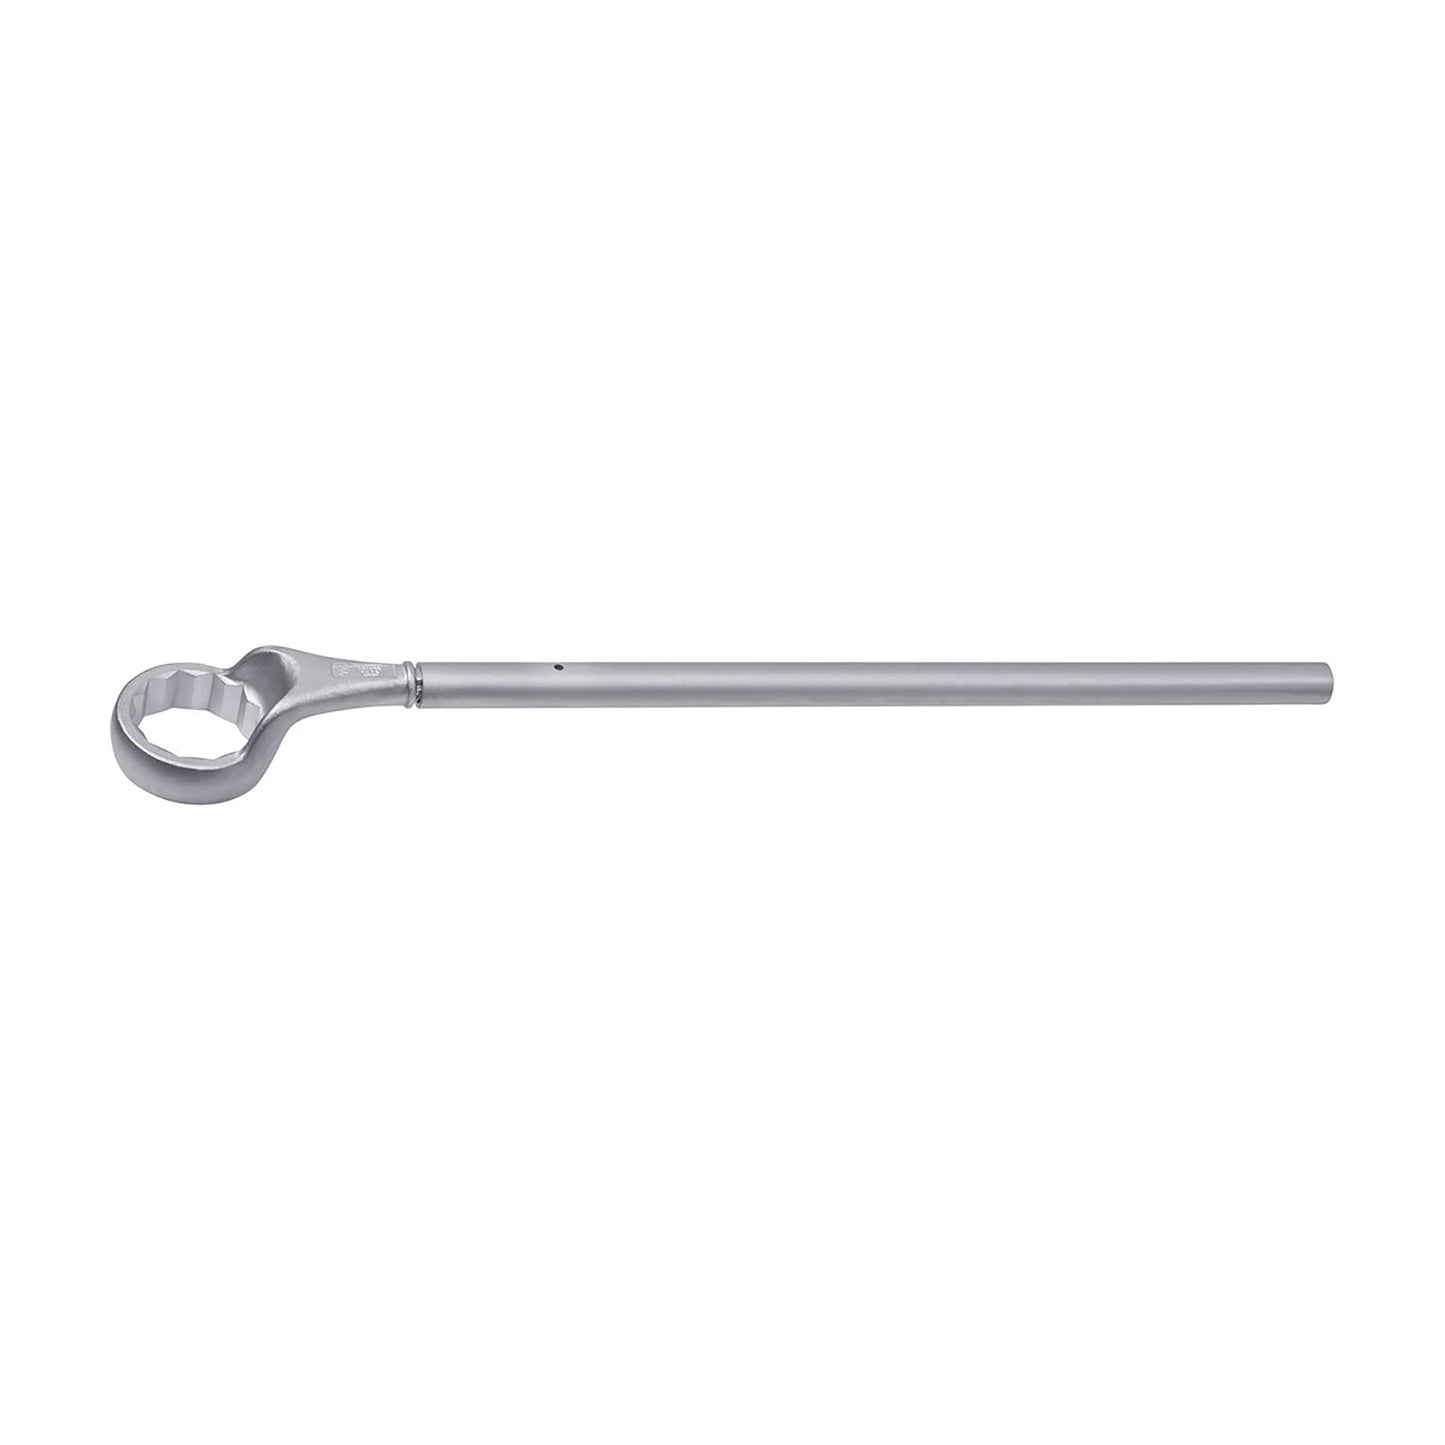 GEDORE 2 A 30 - Traction Wrench, 30mm (6034060)